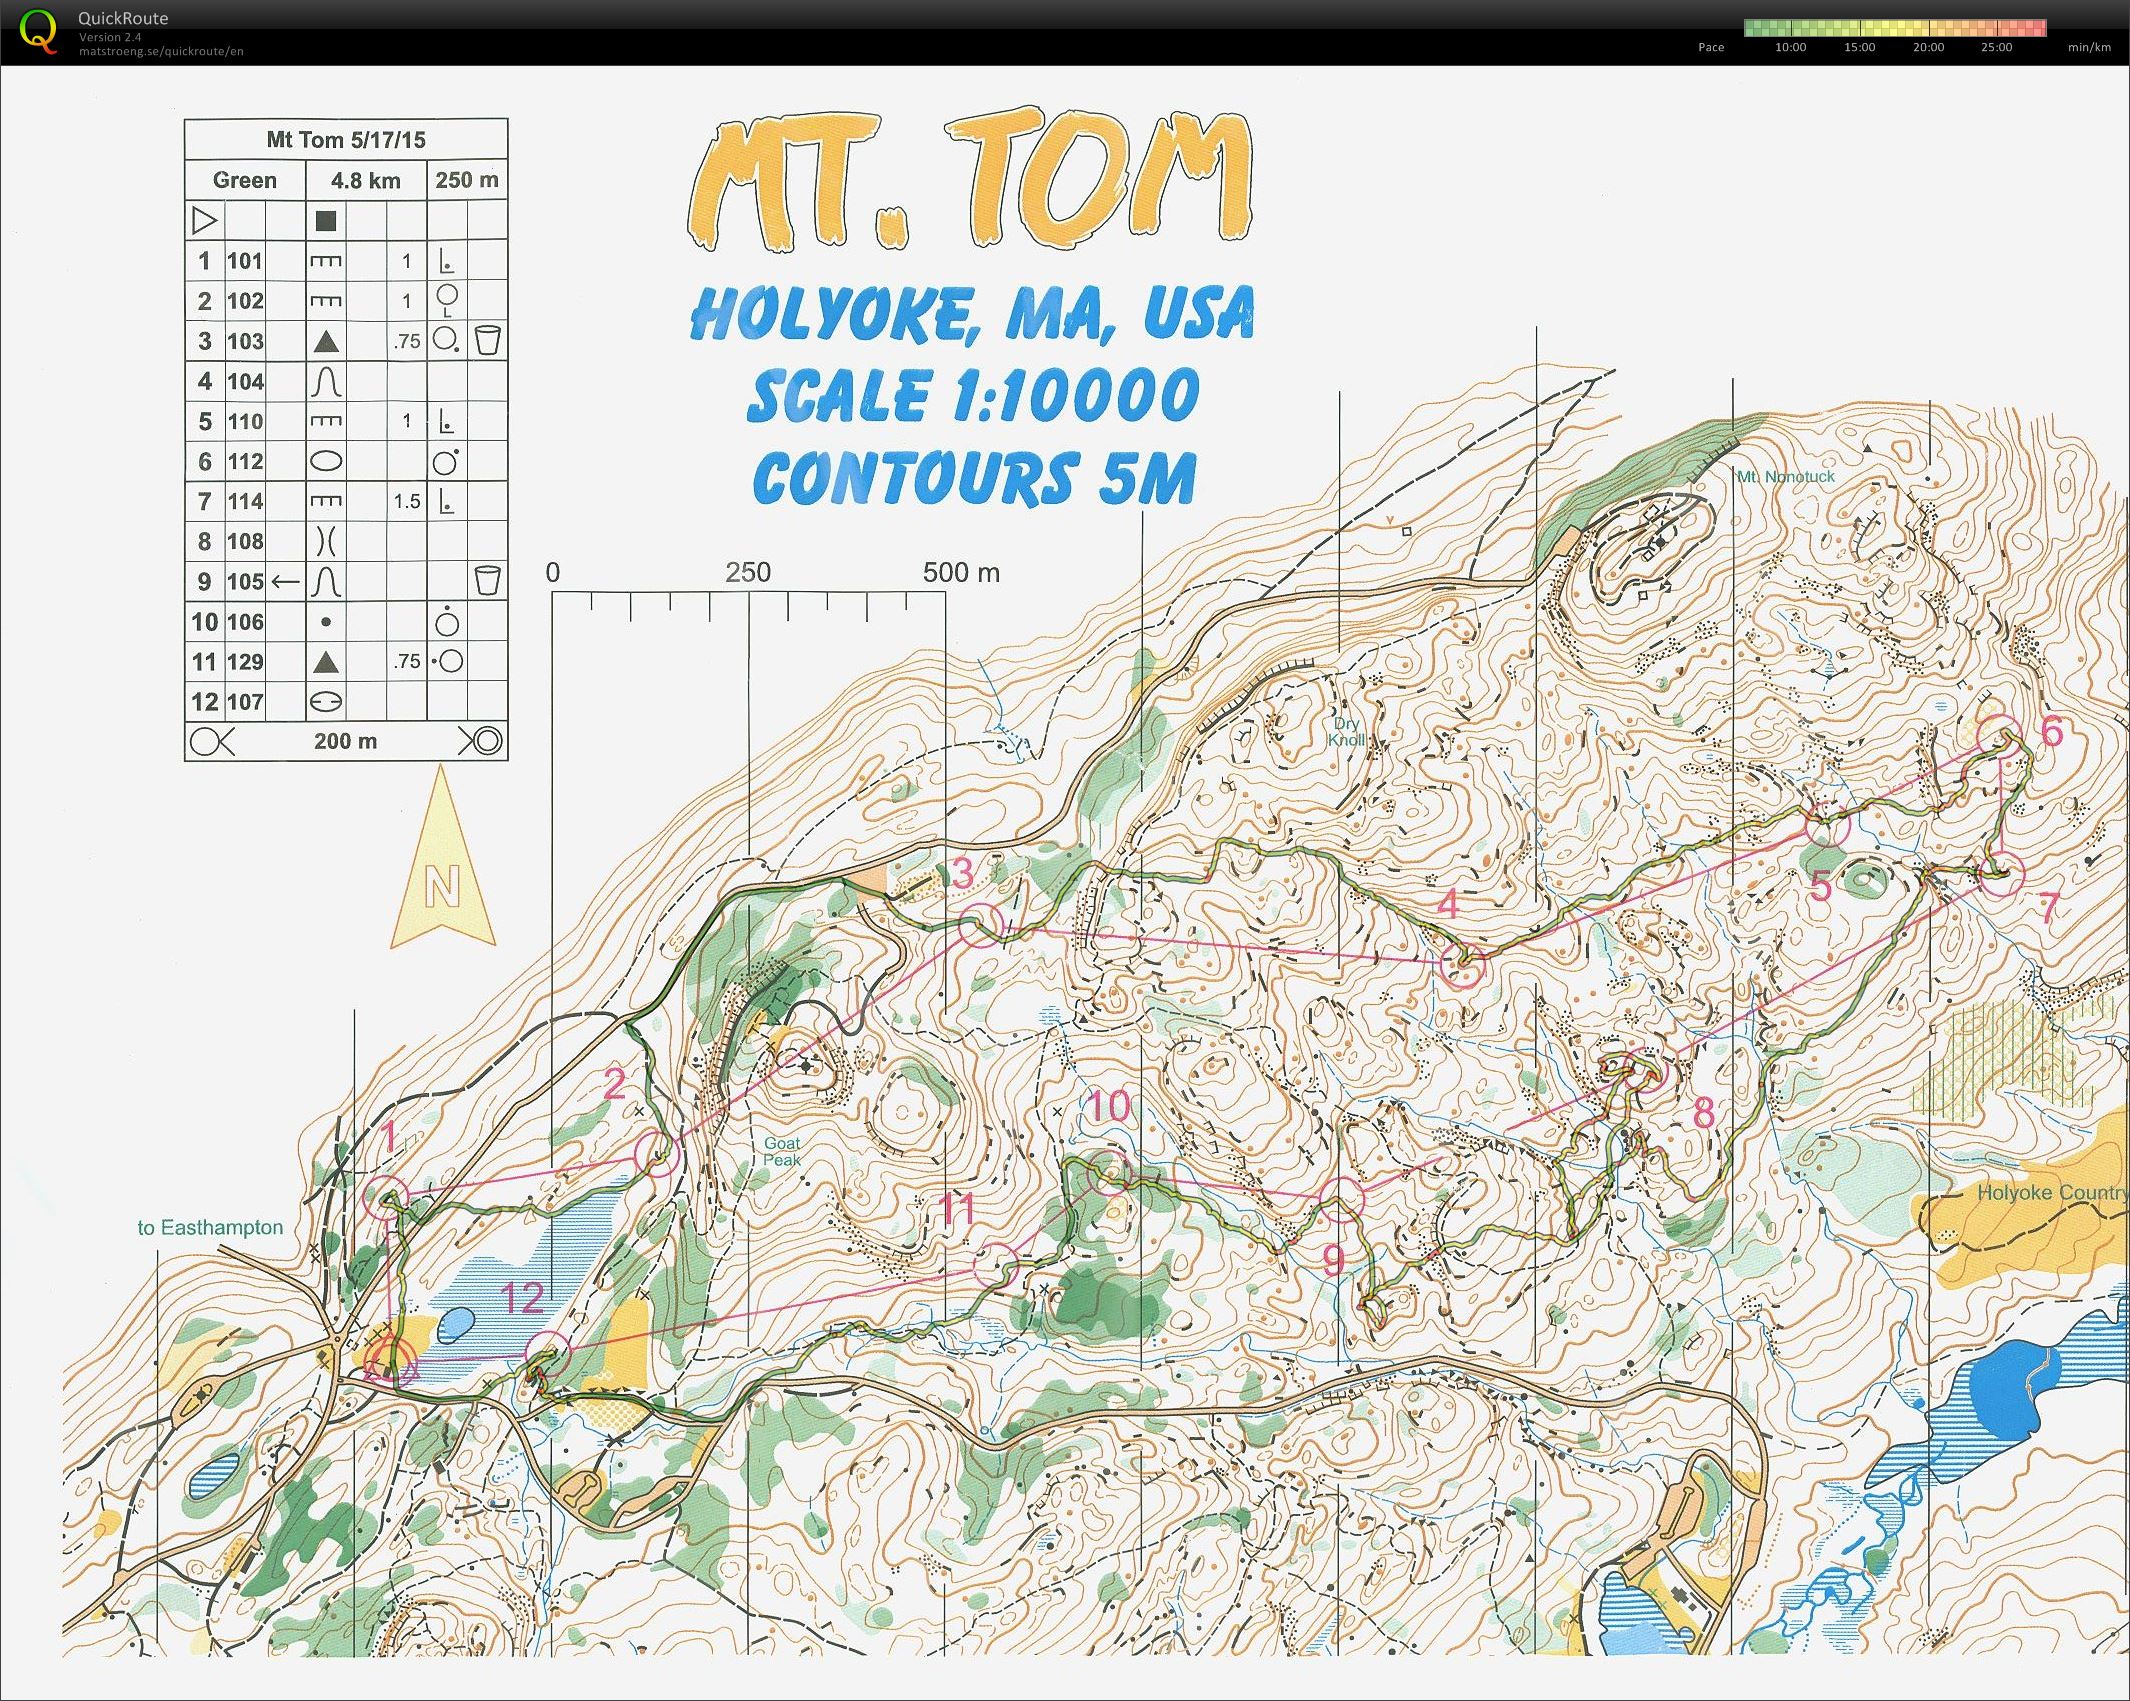 Mt Tom Green course (18-05-2015)